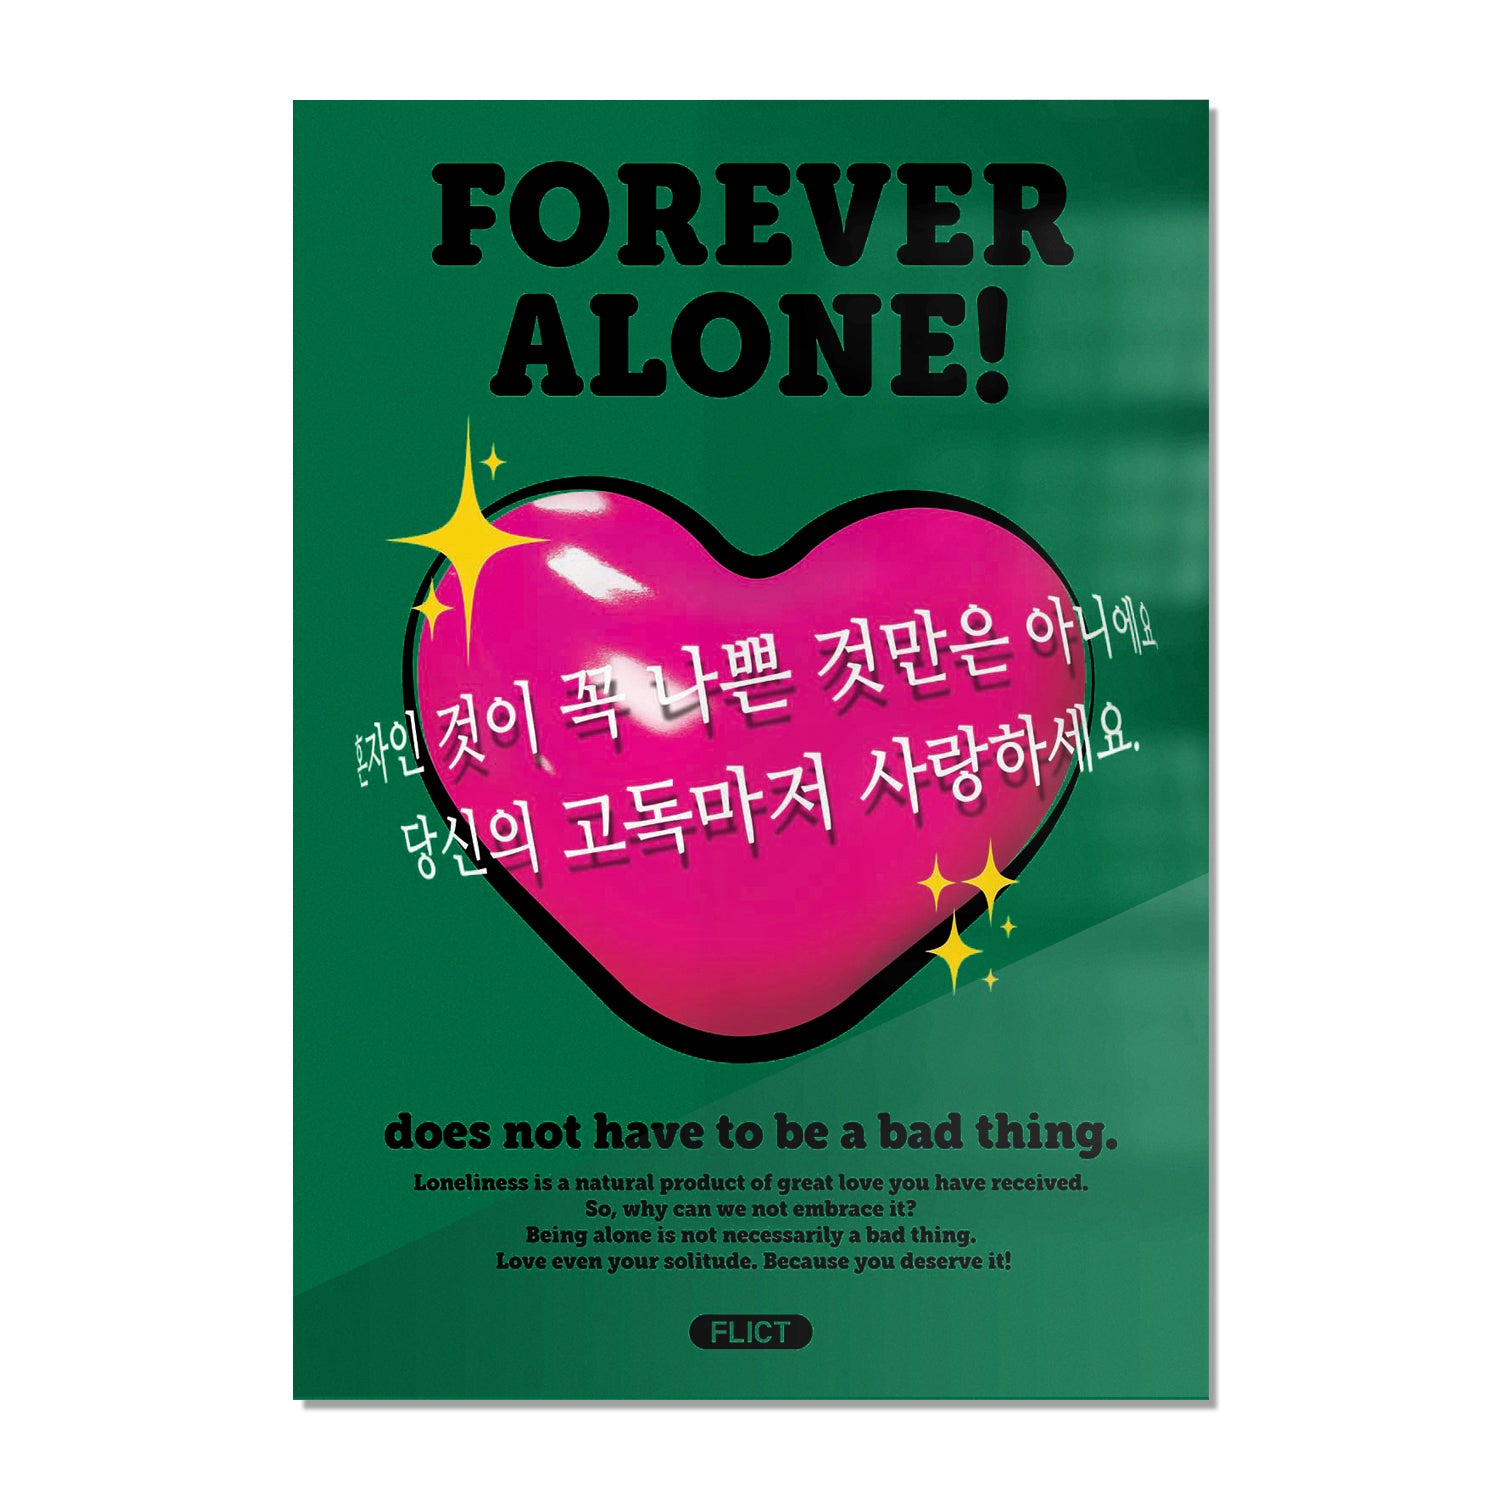 FOREVER ALONE GLOSSY POSTER (A2 SIZE)